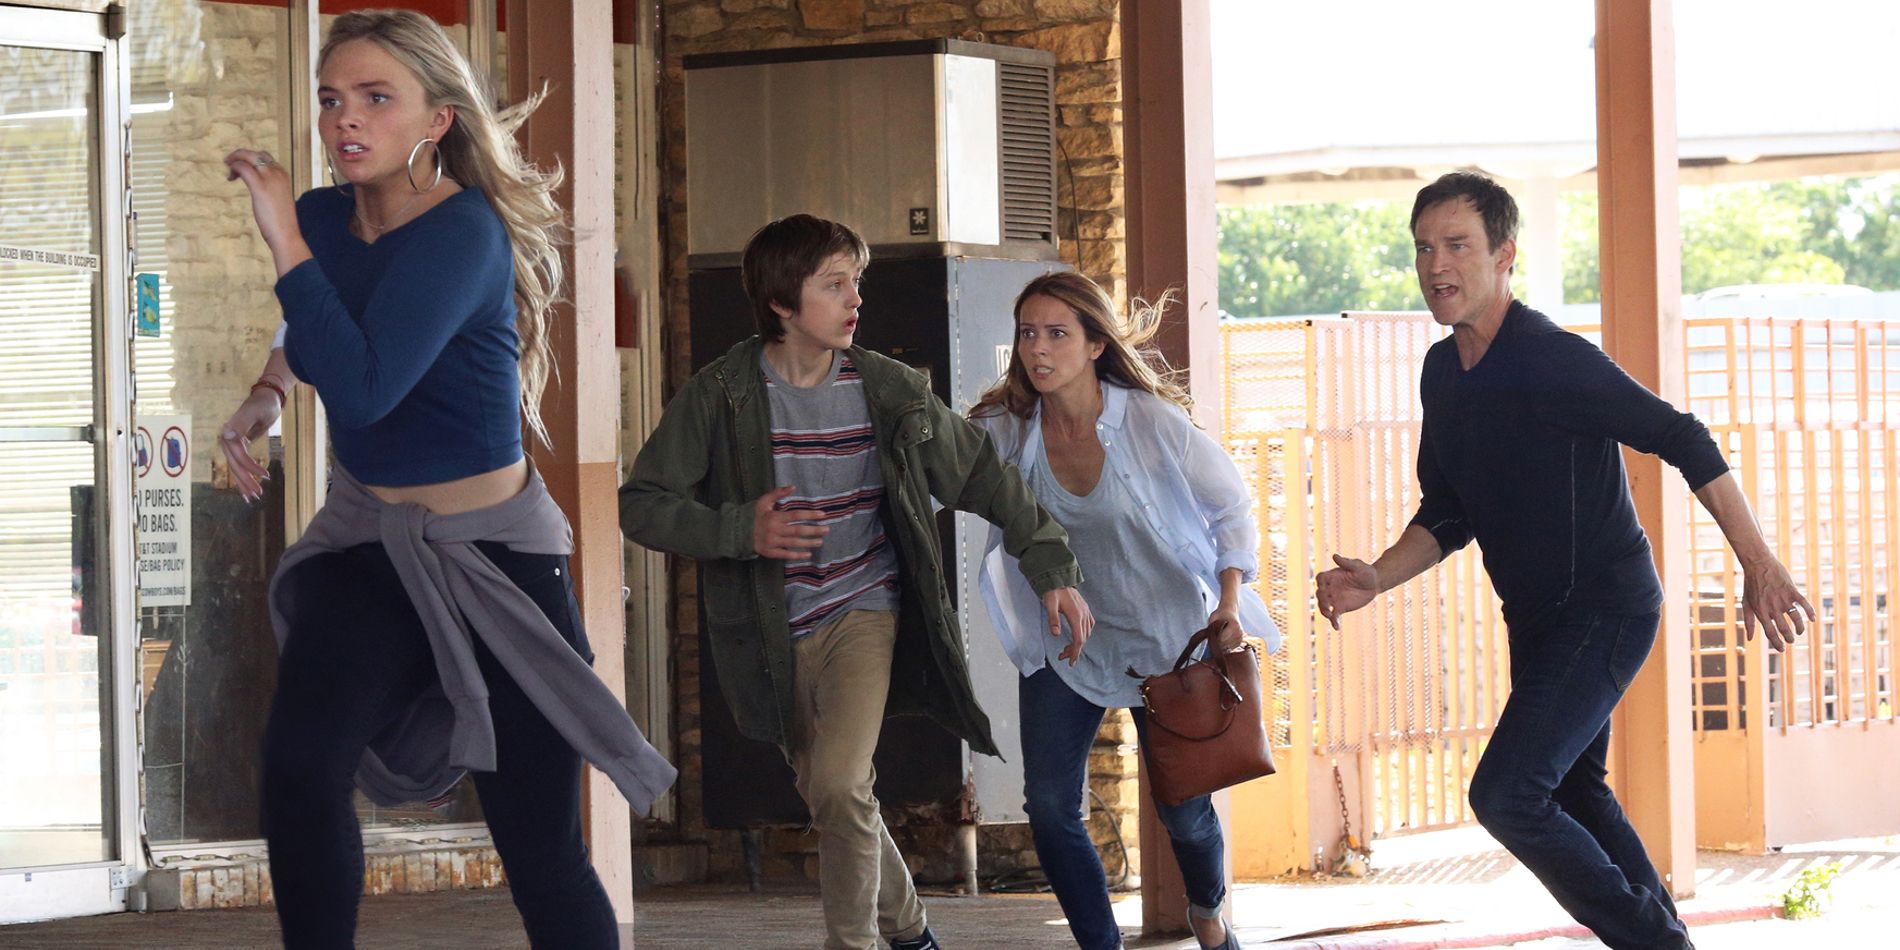 Characters running in The Gifted